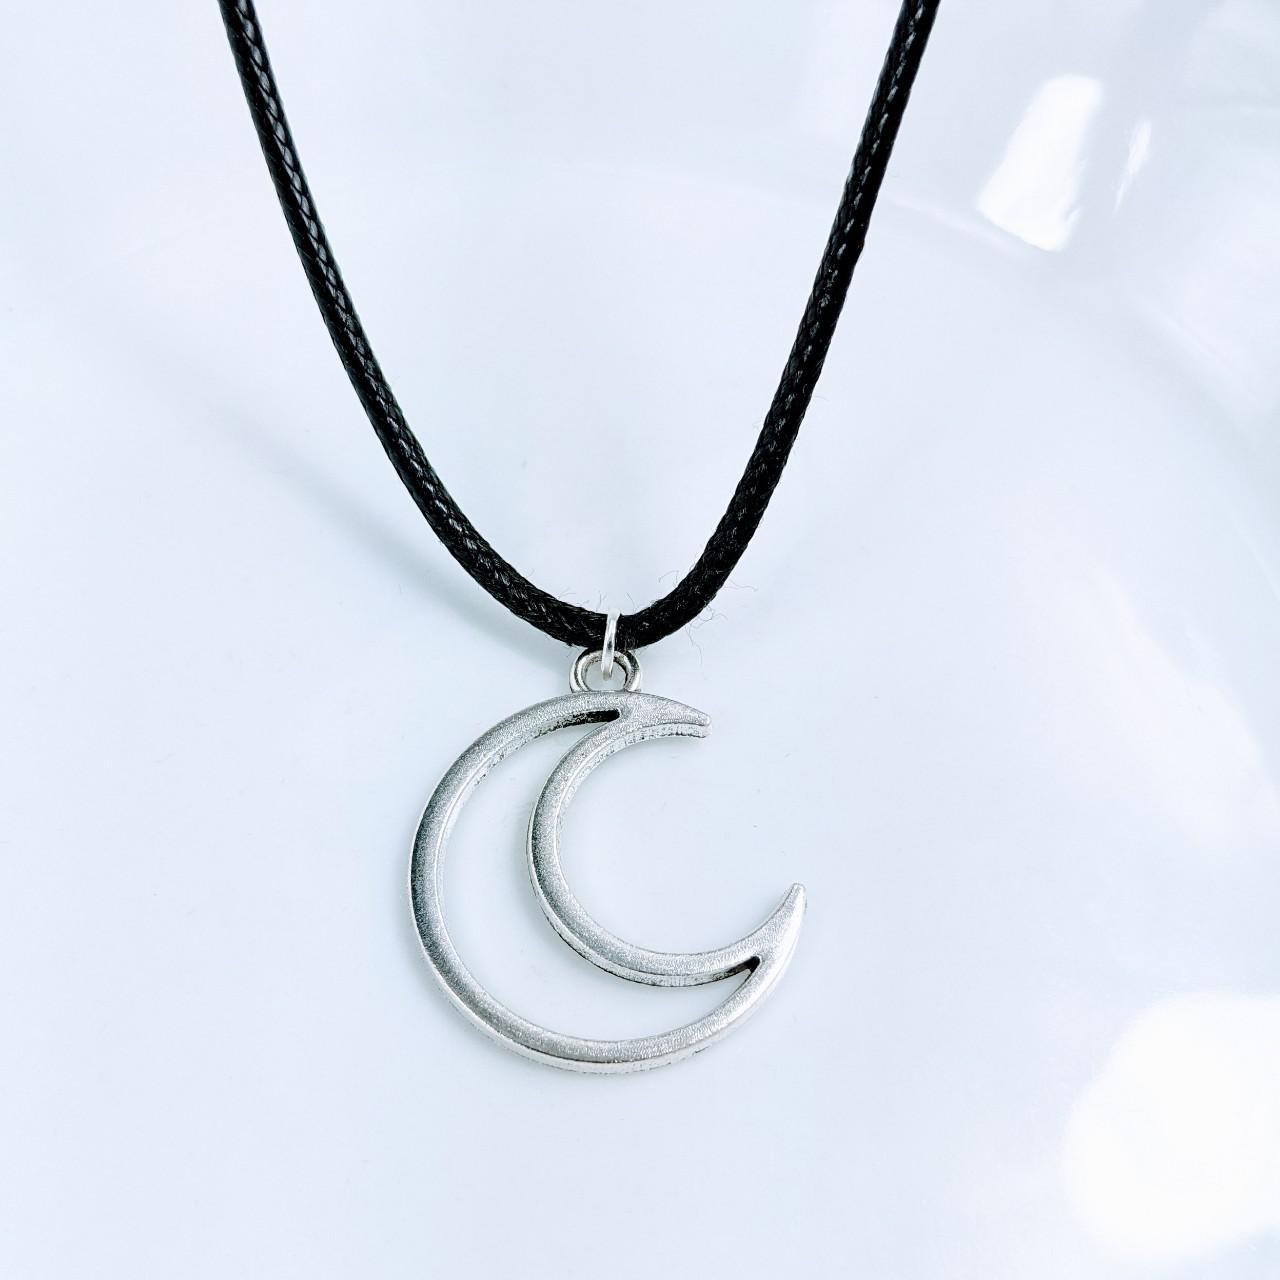 Product Image 1 - Silver Tone Crescent Moon Necklace
Brand